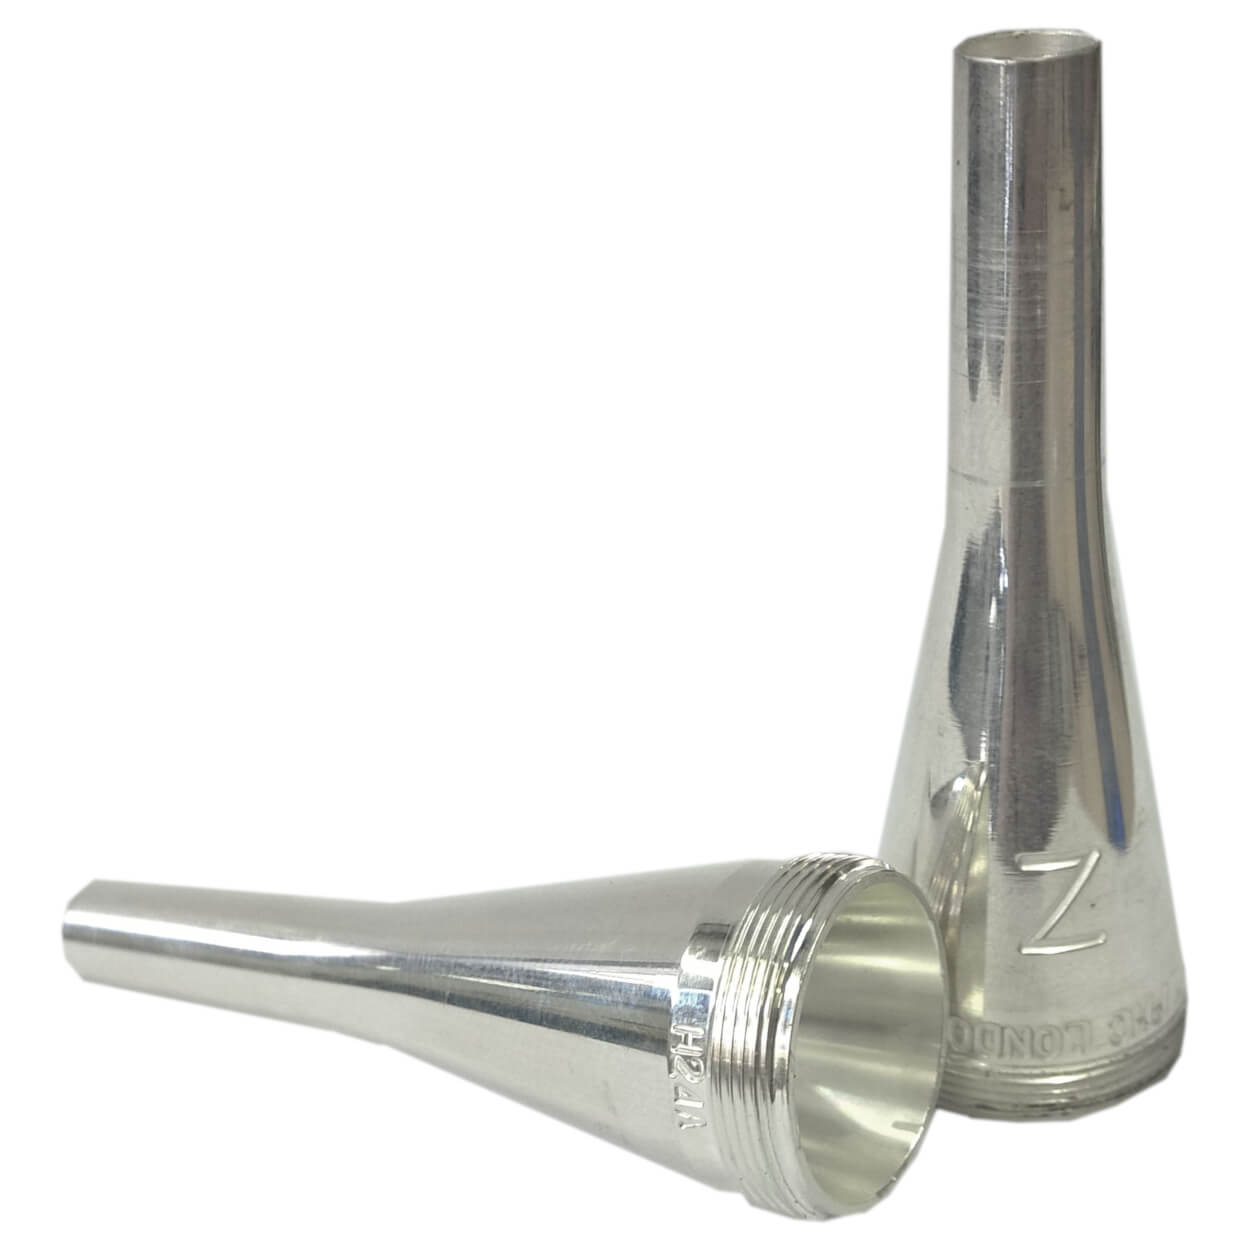 French Horn PHC Z heavycup mouthpiece with Paxman acetal rim